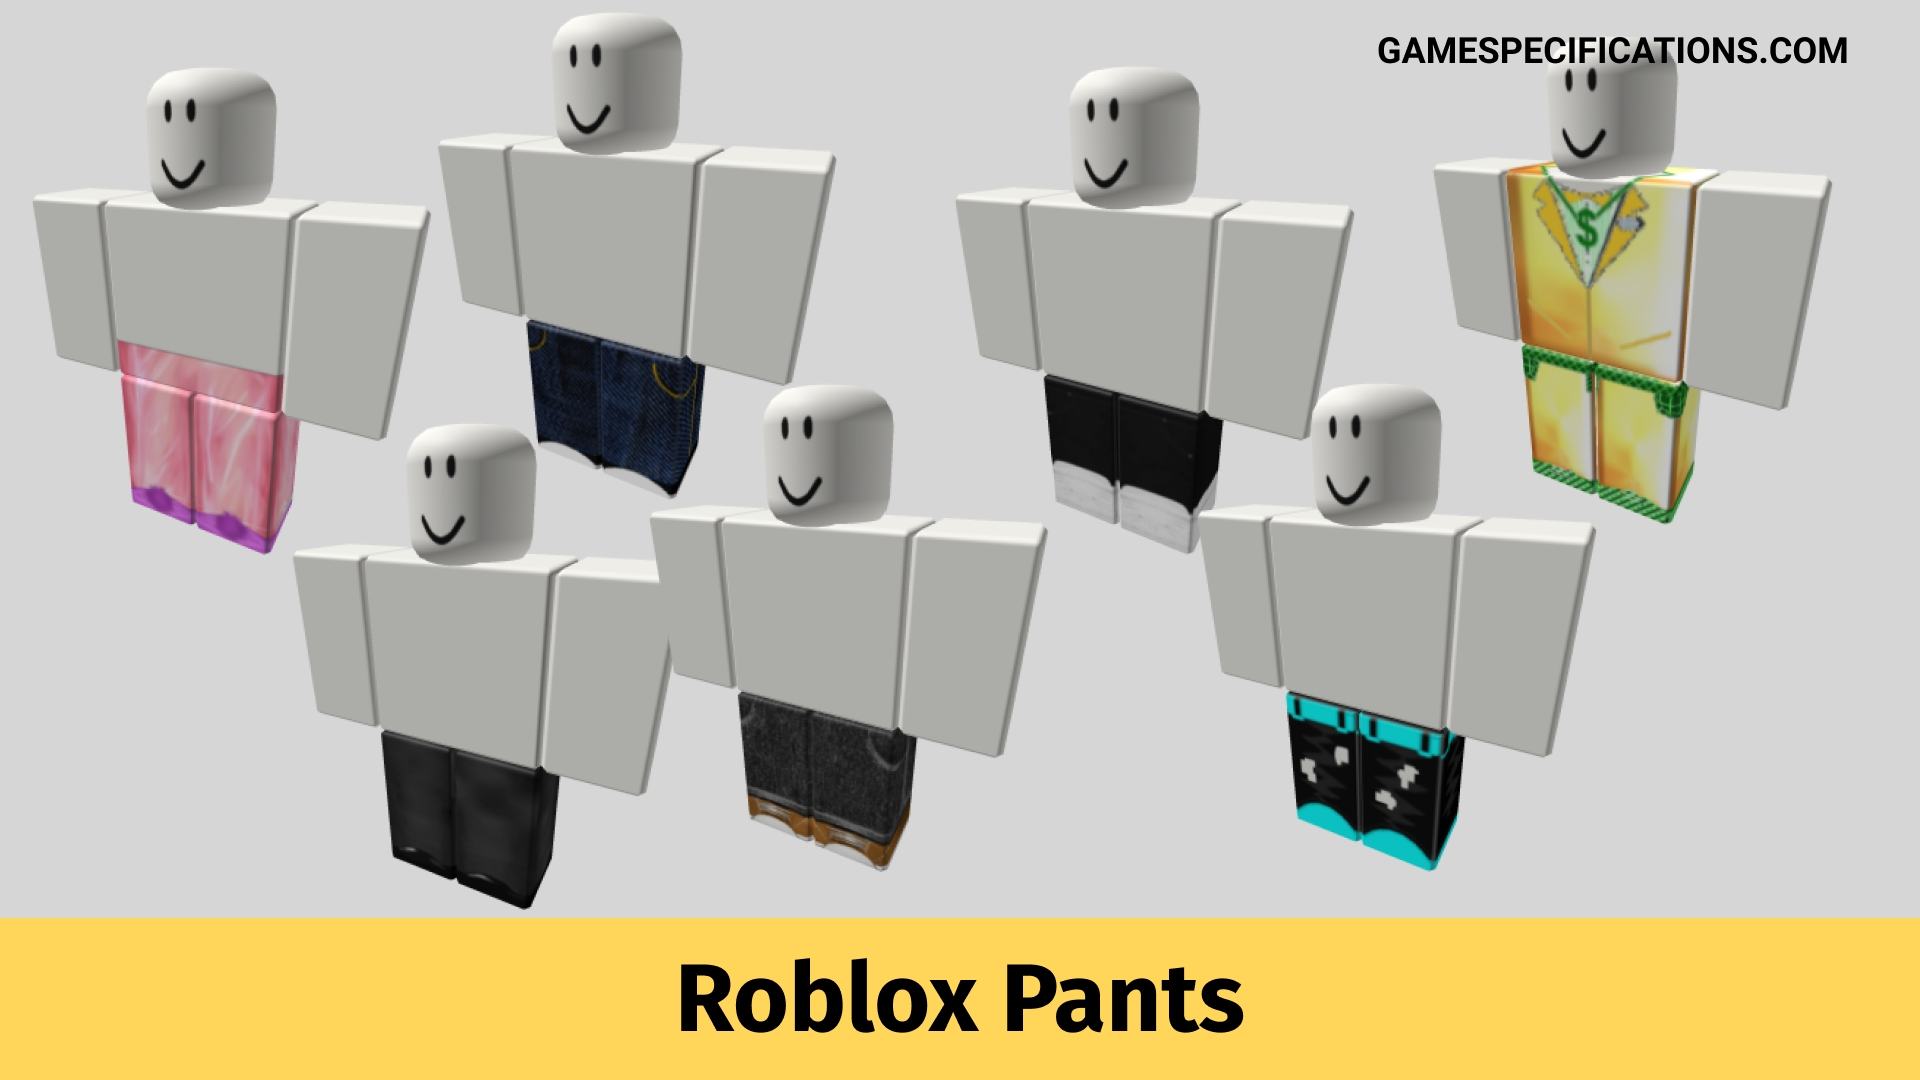 Top 23 Roblox Pants Of All Time Free Aesthetic And Best Selling Game Specifications - cool pants roblox